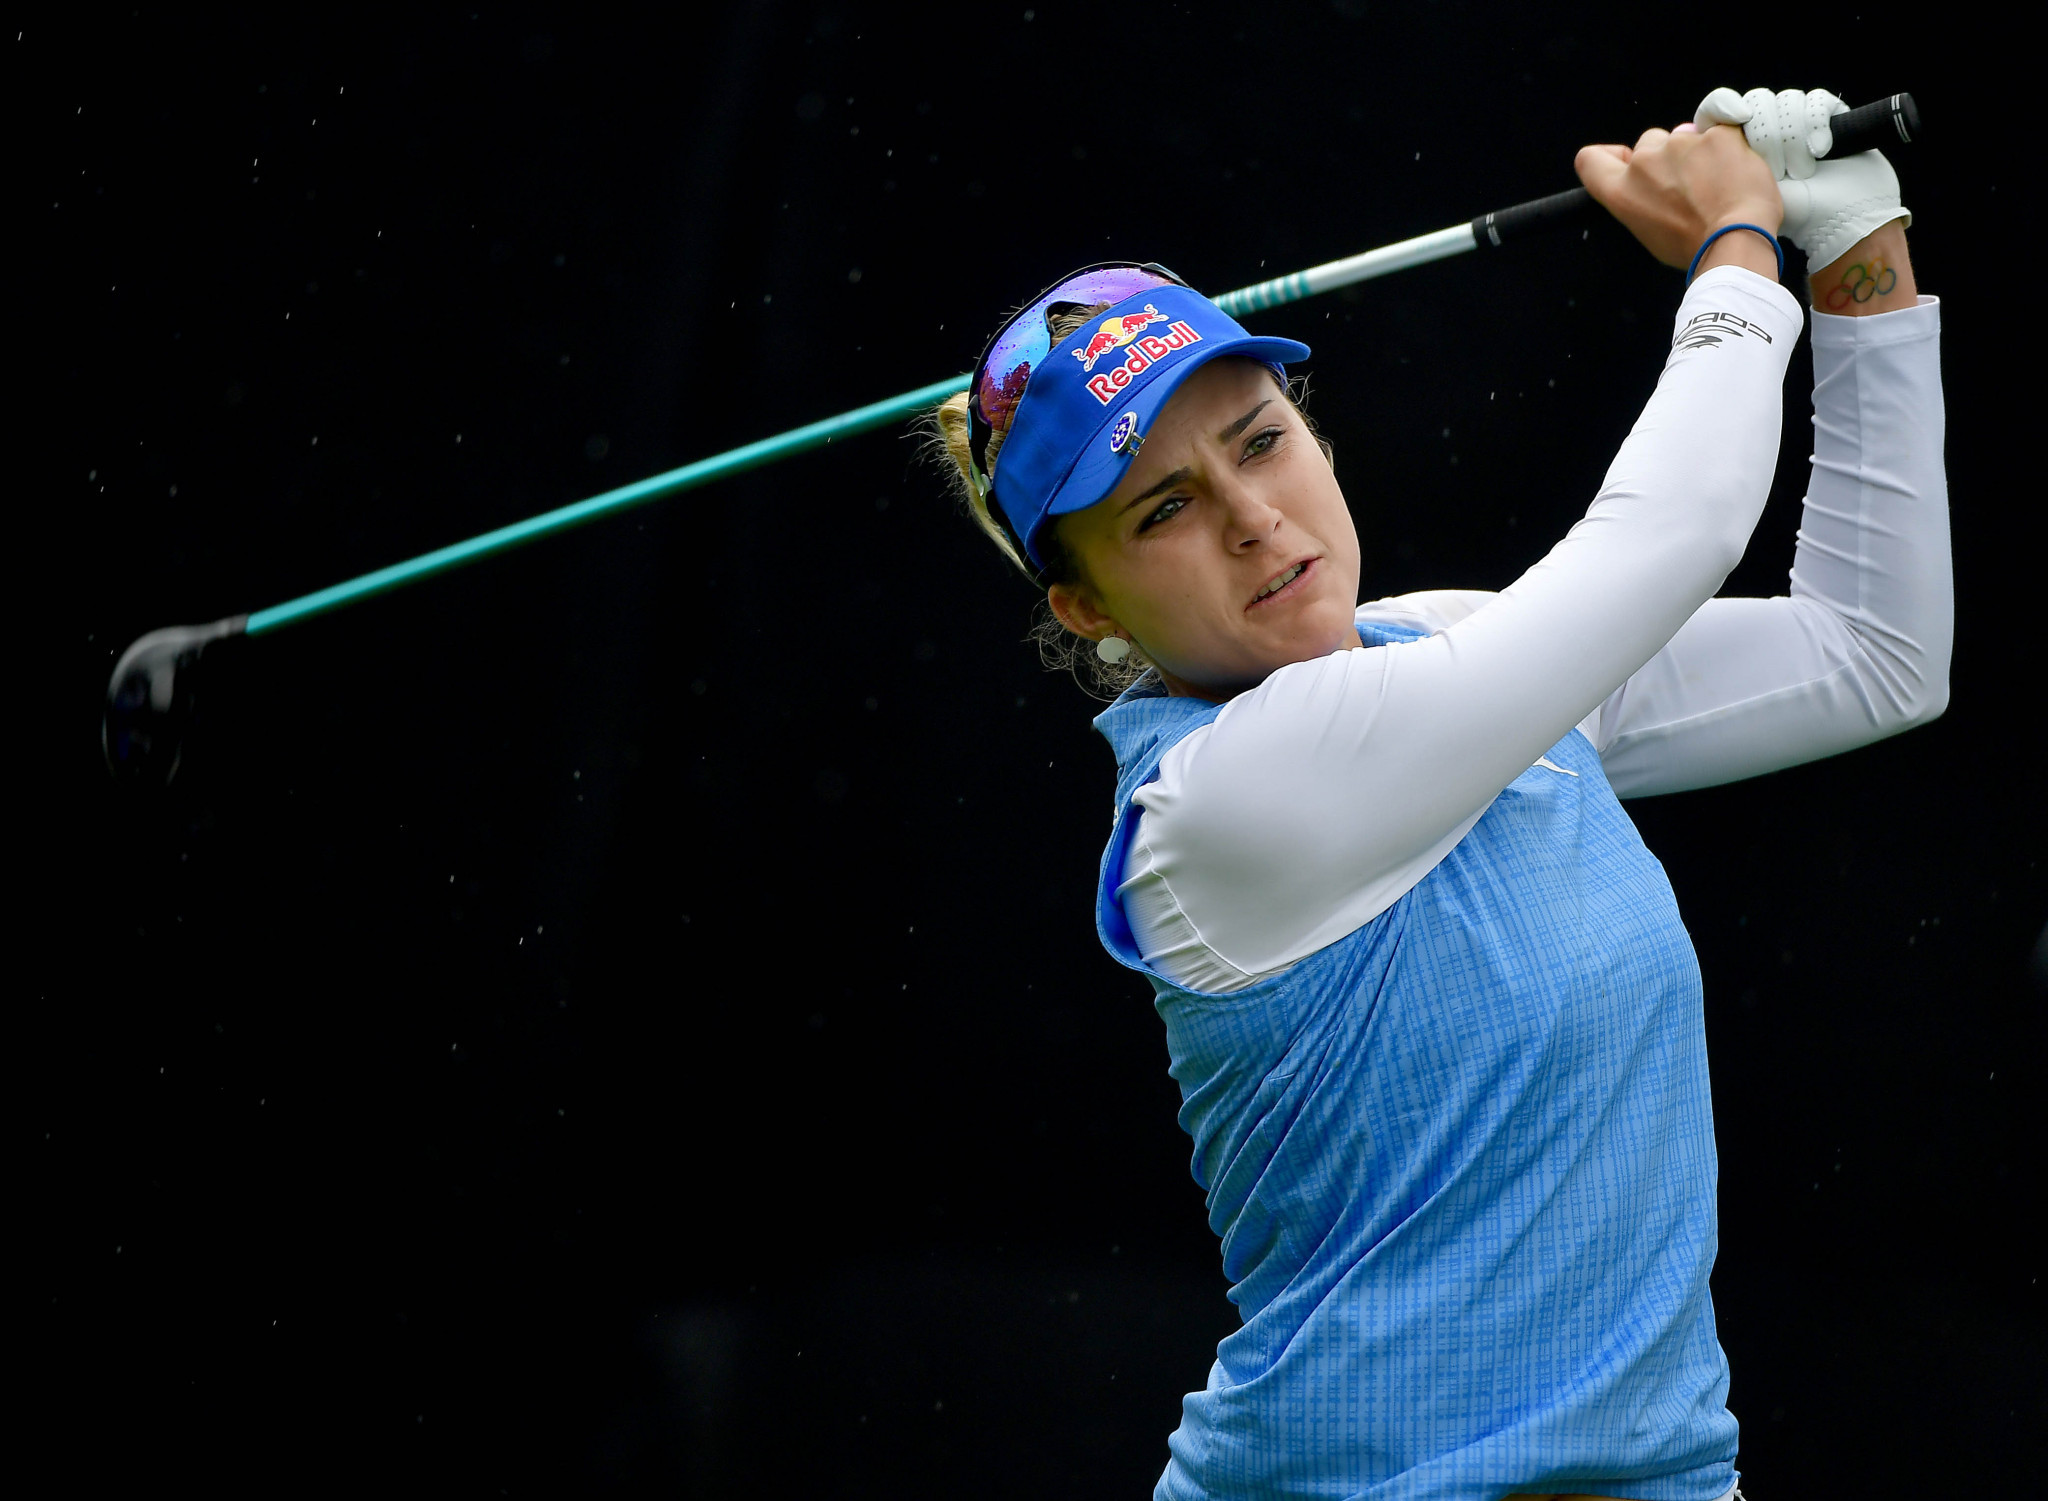 World number two Lexi Thompson is among the favourites for victory at the ANA Inspiration tournament ©Getty Images